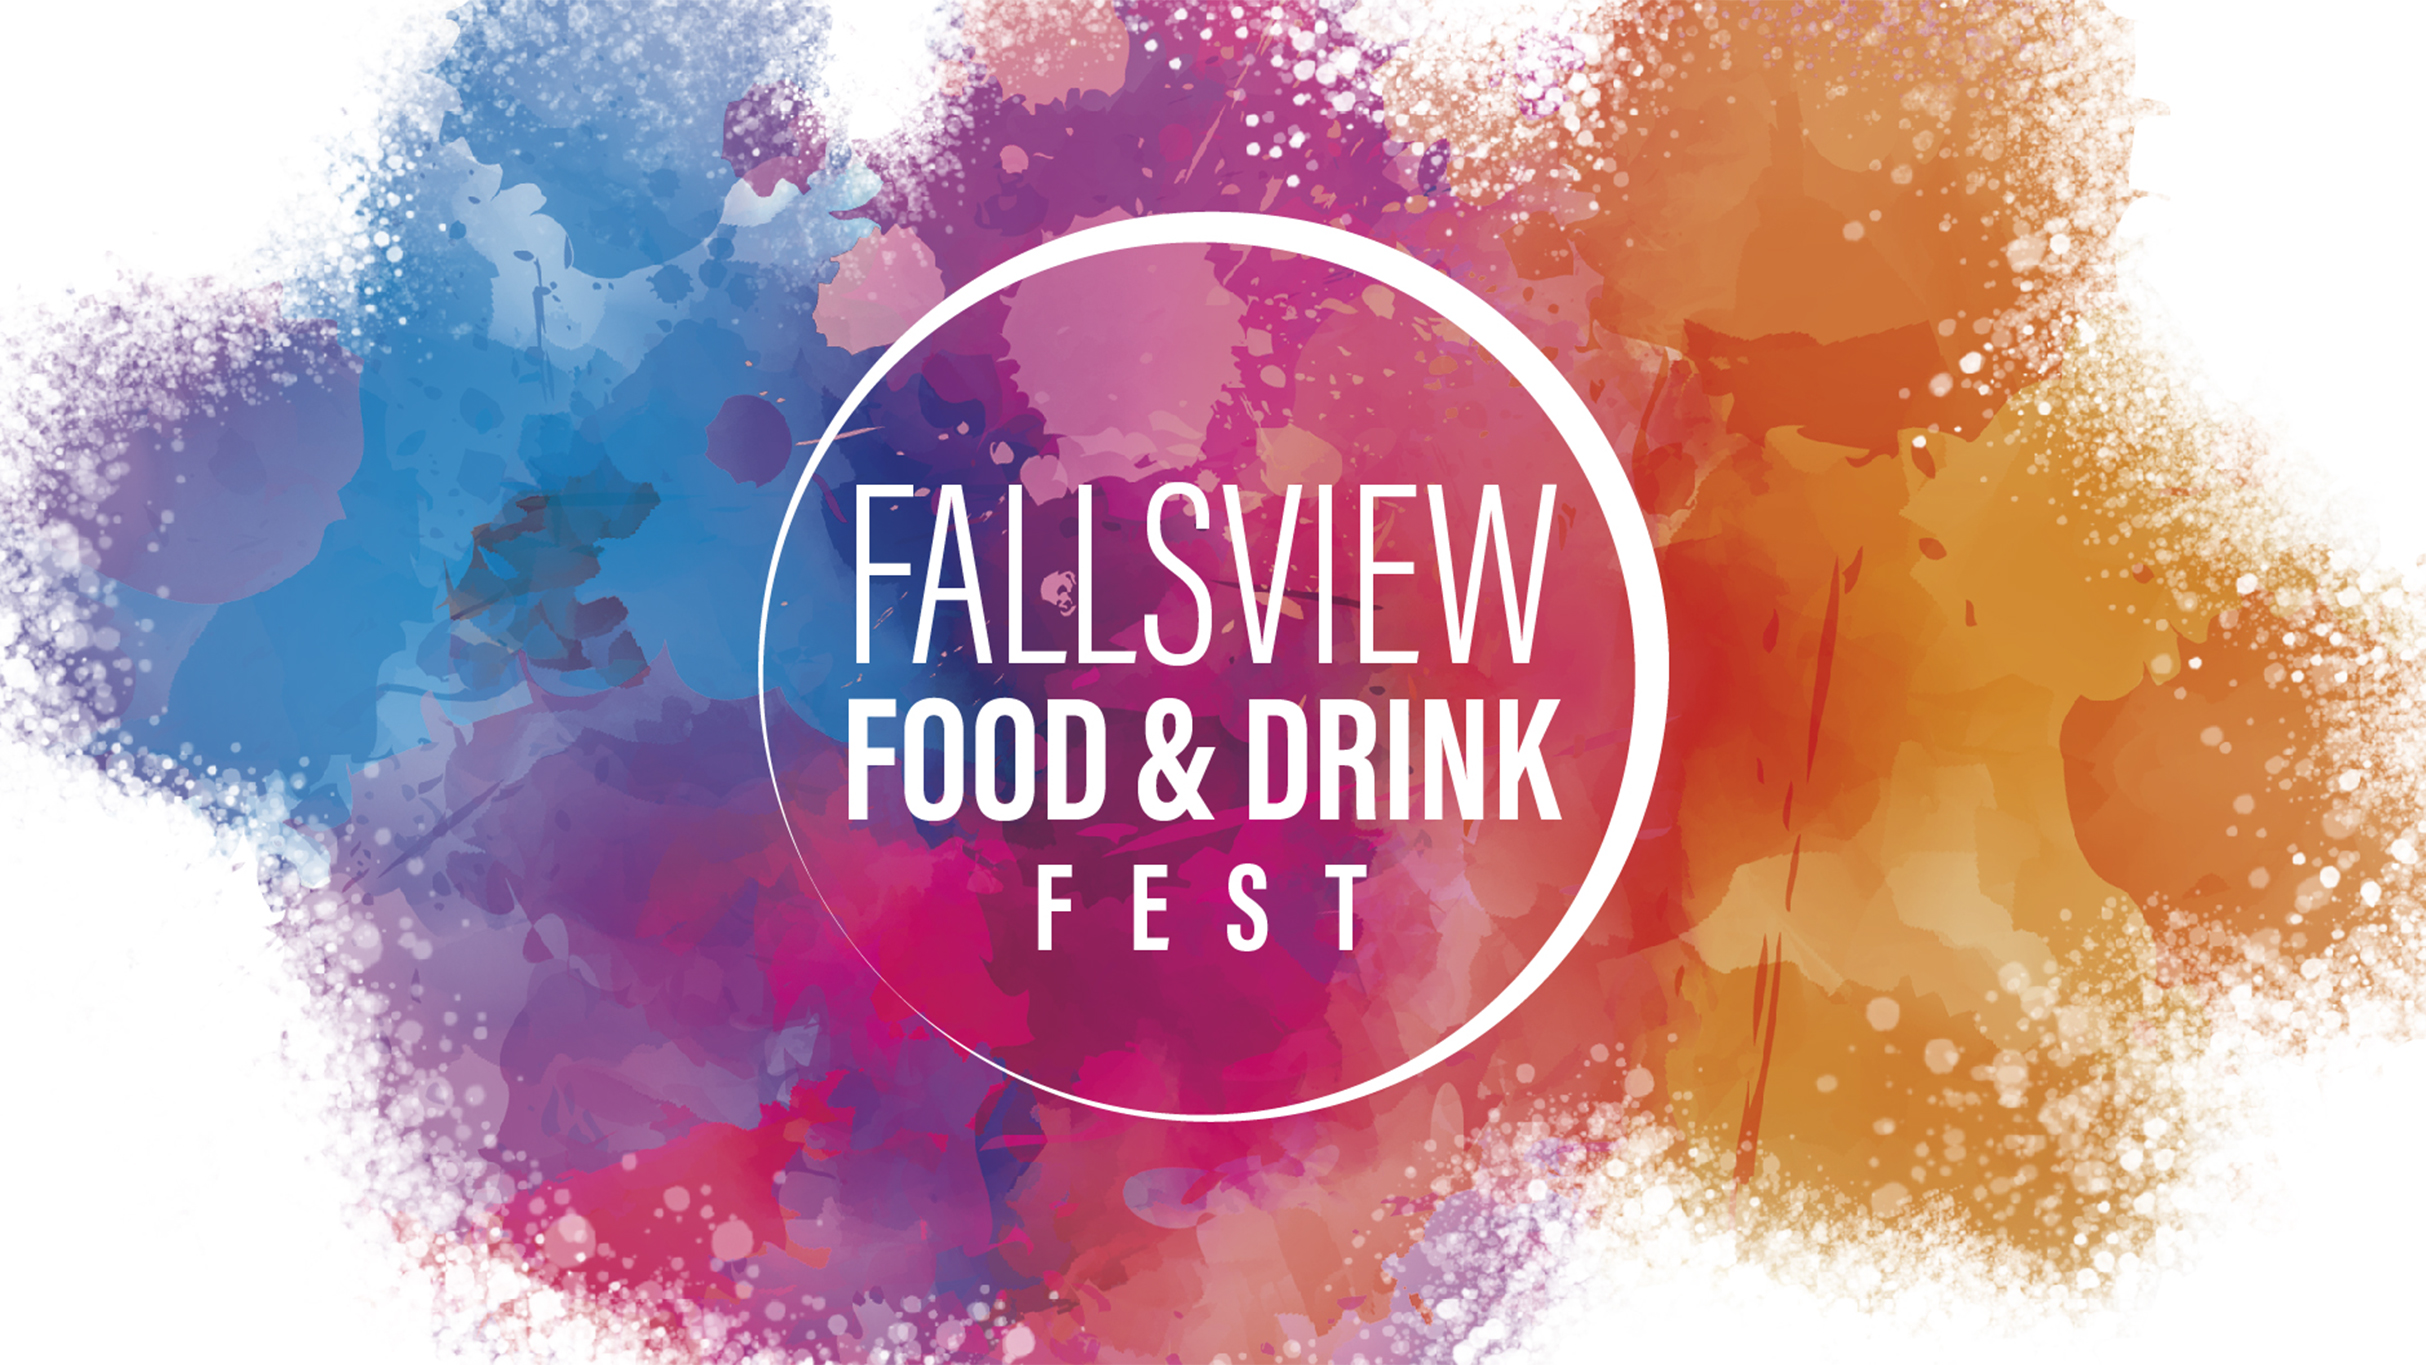 Fallsview Food & Drink Fest - Brunch With Mary Berg